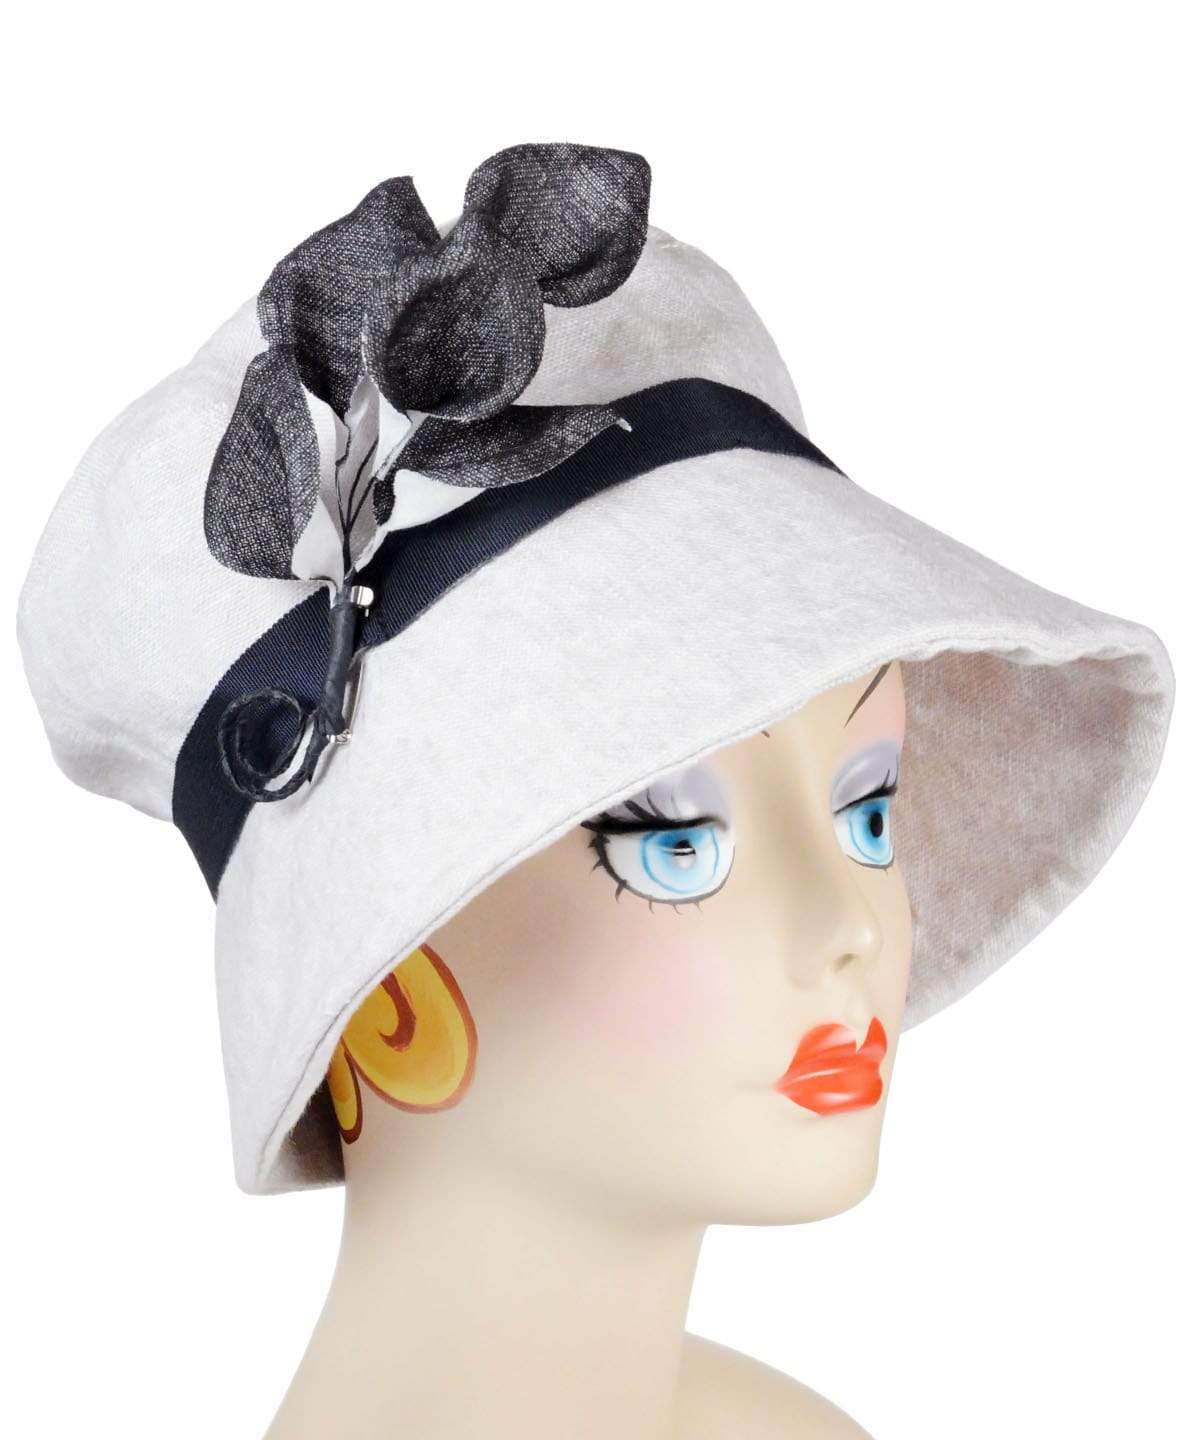 Molly Hat Style - Linen in Bone (Only One Left!)